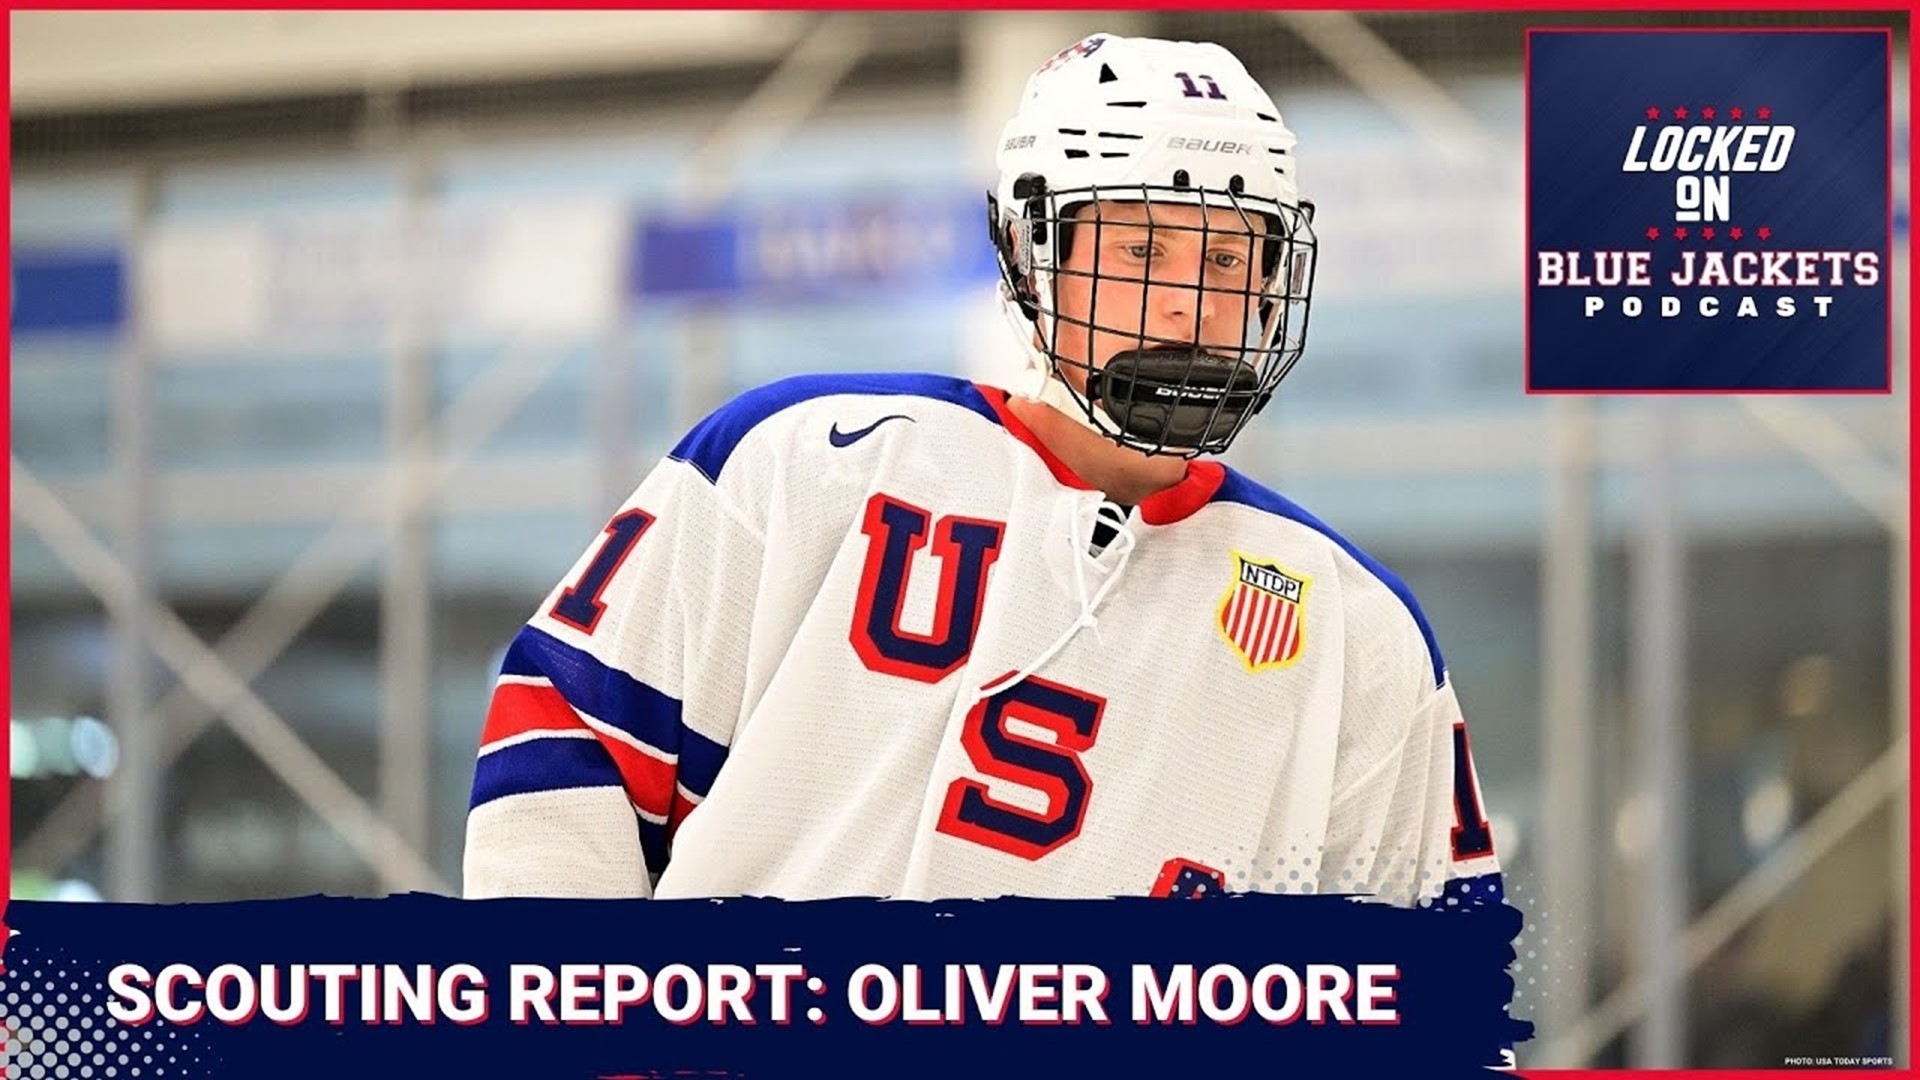 Today we're checking in on a small, speedy center from the USHL, as I talk to Hadi Kalakeche about Oliver Moore's potential, draft stock and potential fit.